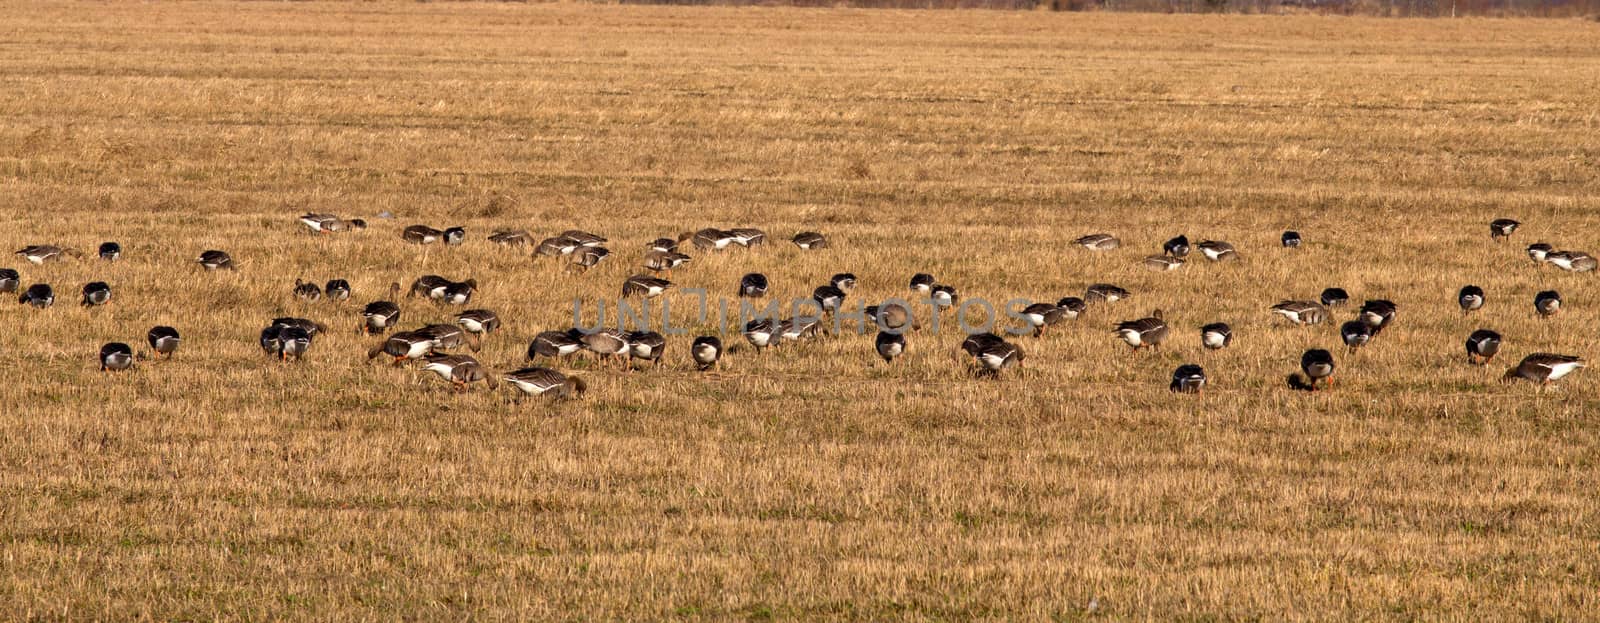 spring time  of migratory geese by max51288